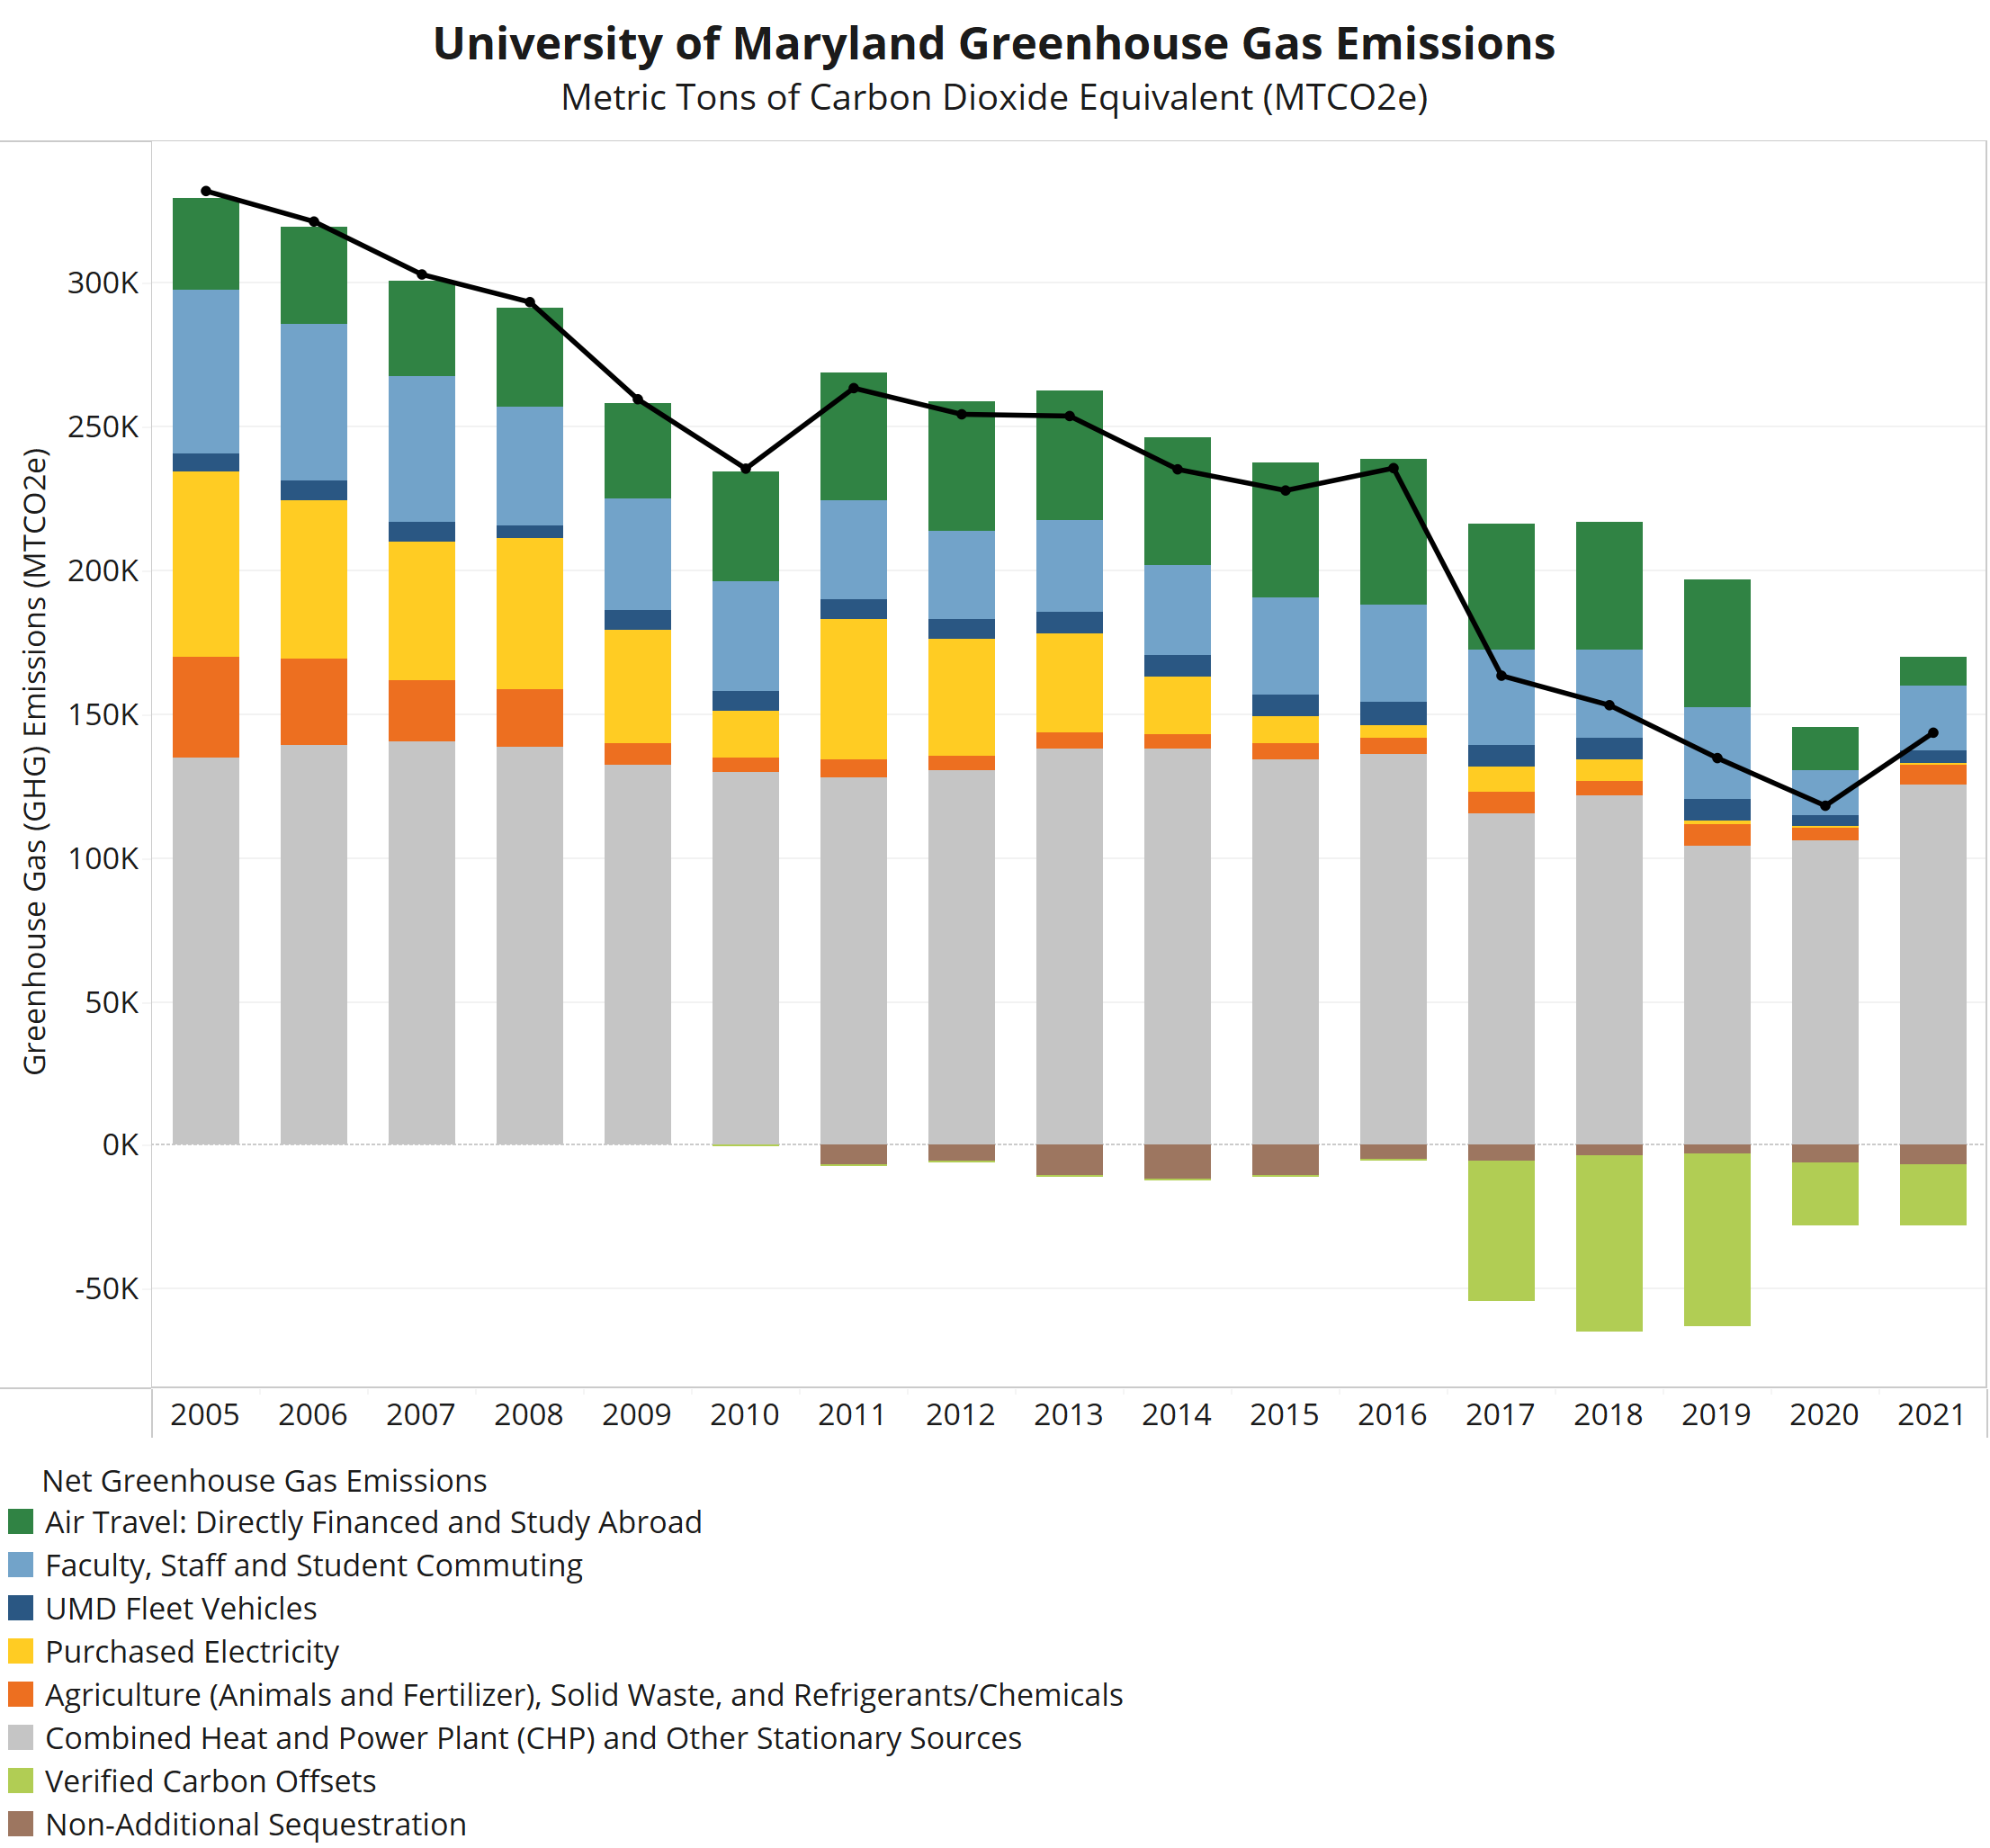 UMD's greenhouse gas emissions reductions from 2005-2021